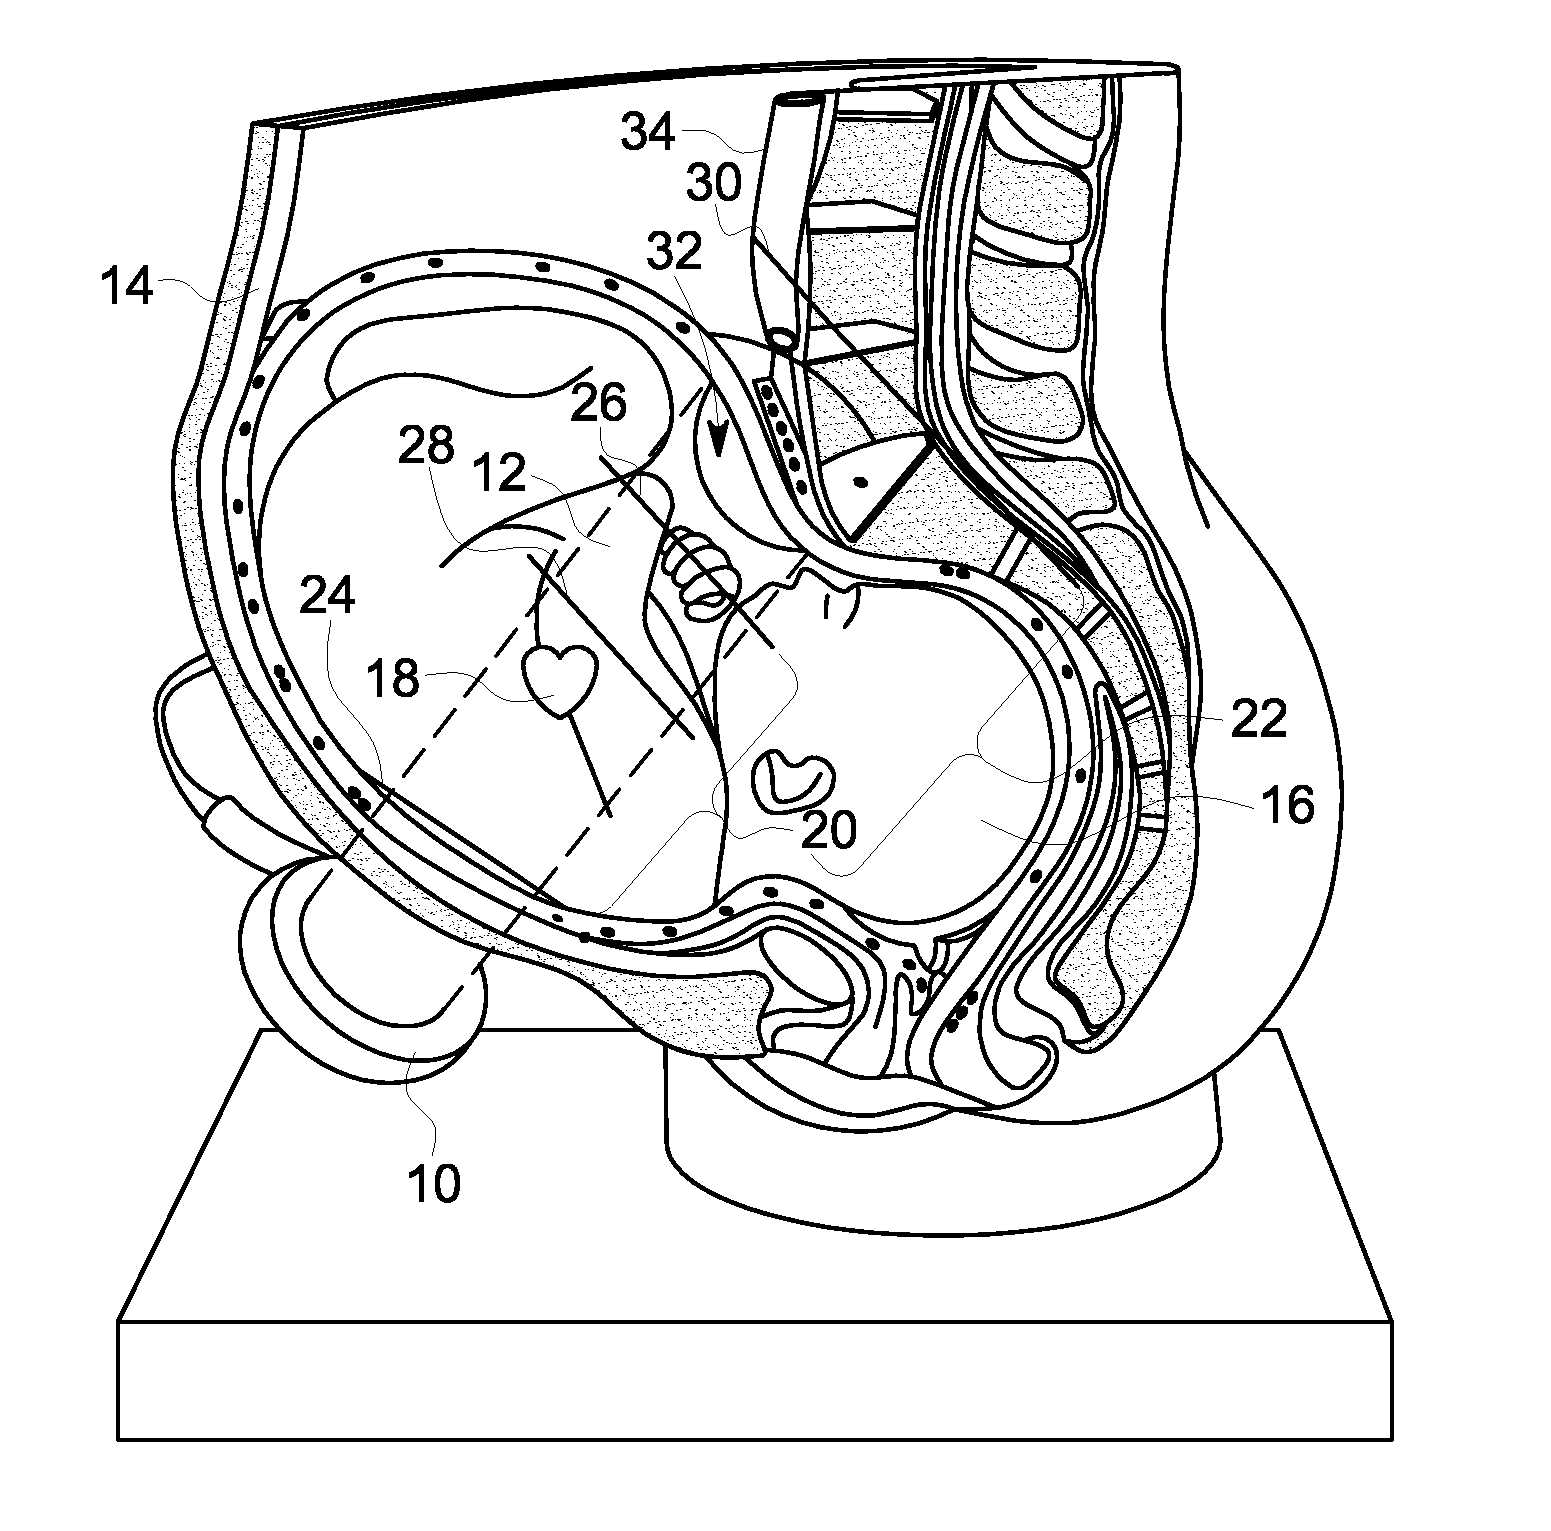 Method and Device for Fetal Heart Rate Monitoring with Maternal Contribution Detection